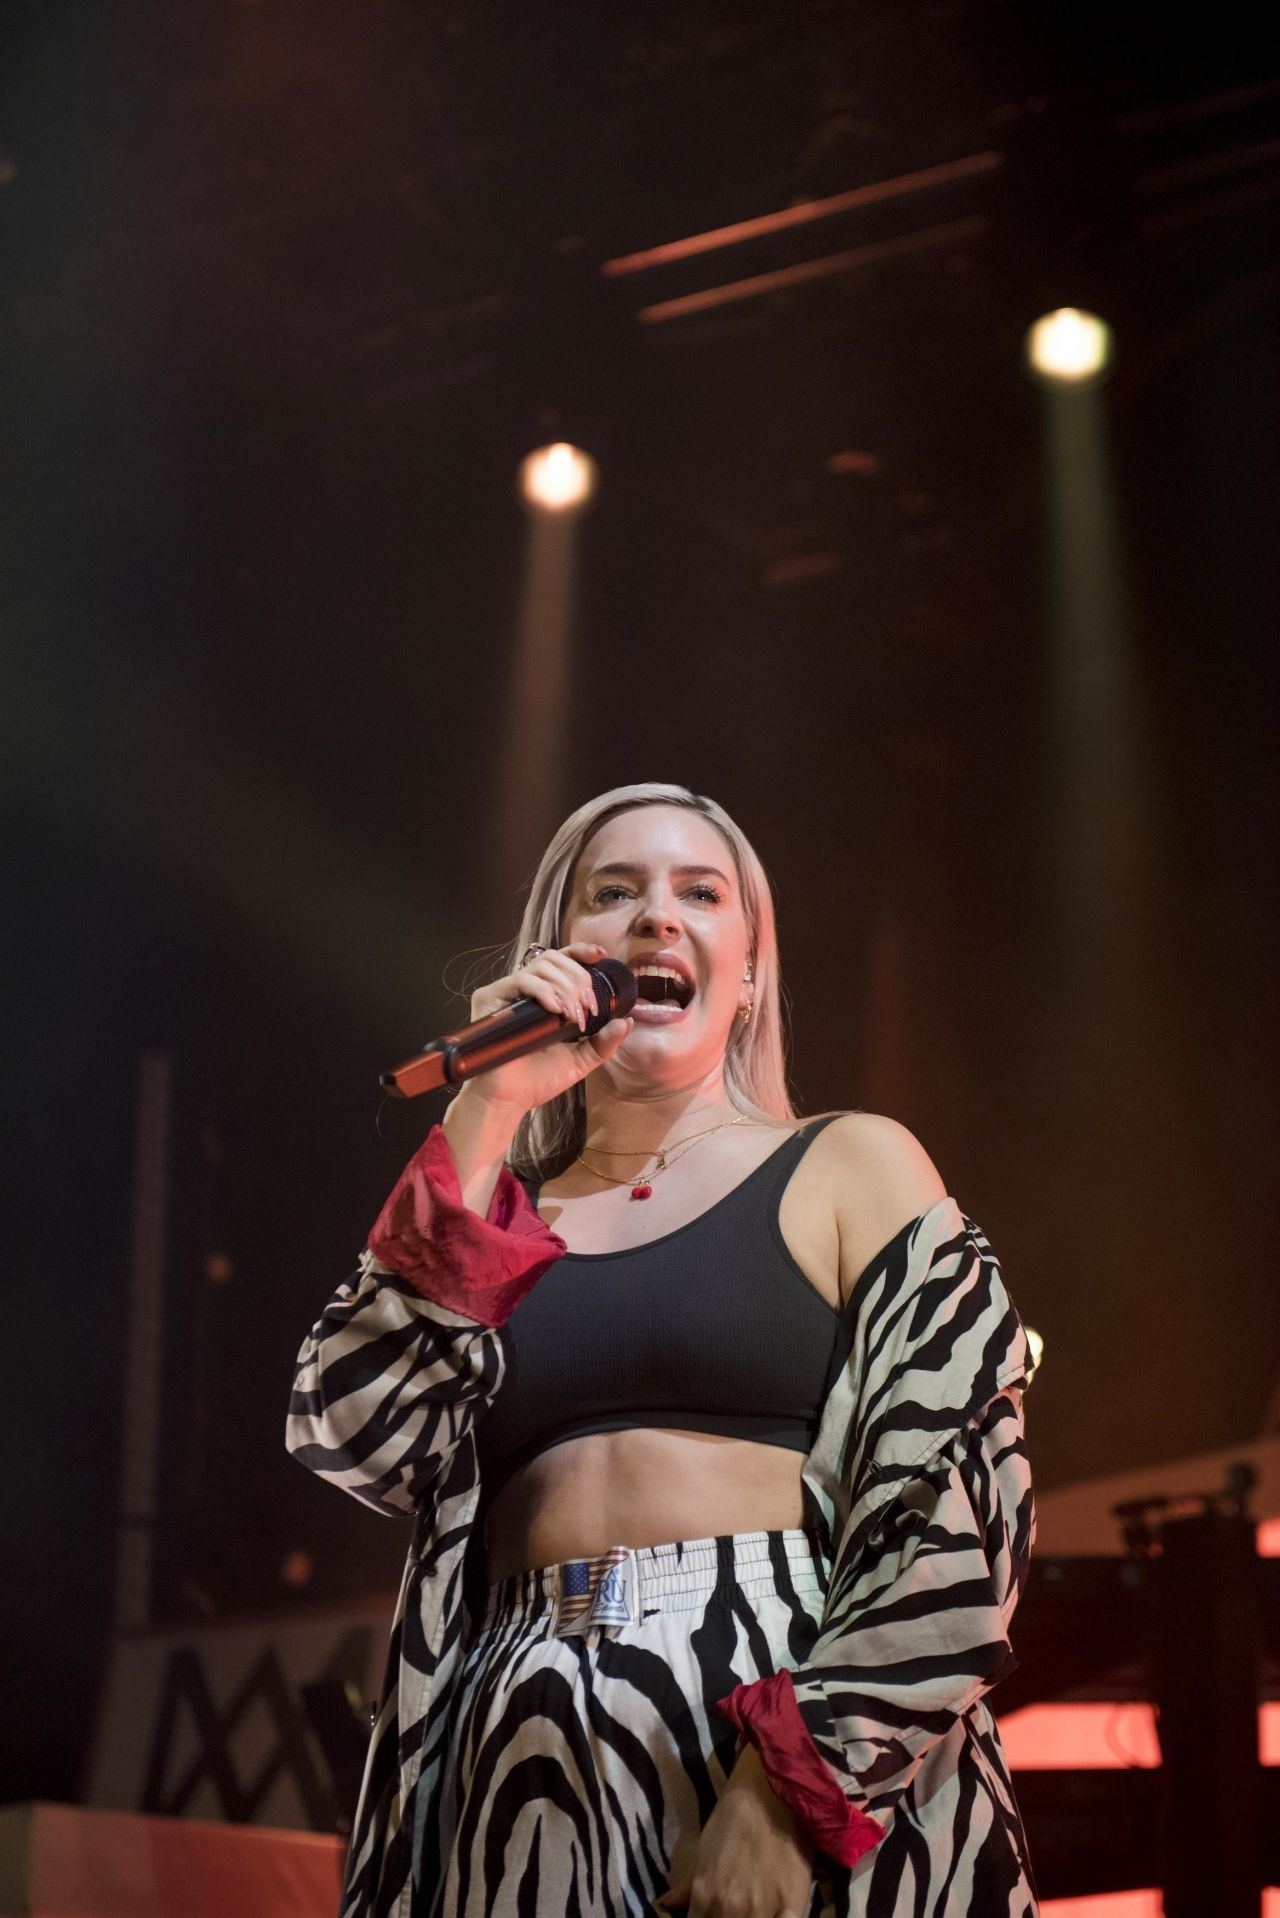 Anne-Marie Performing Live at the Roundhouse in London 03/22/20181280 x 1918